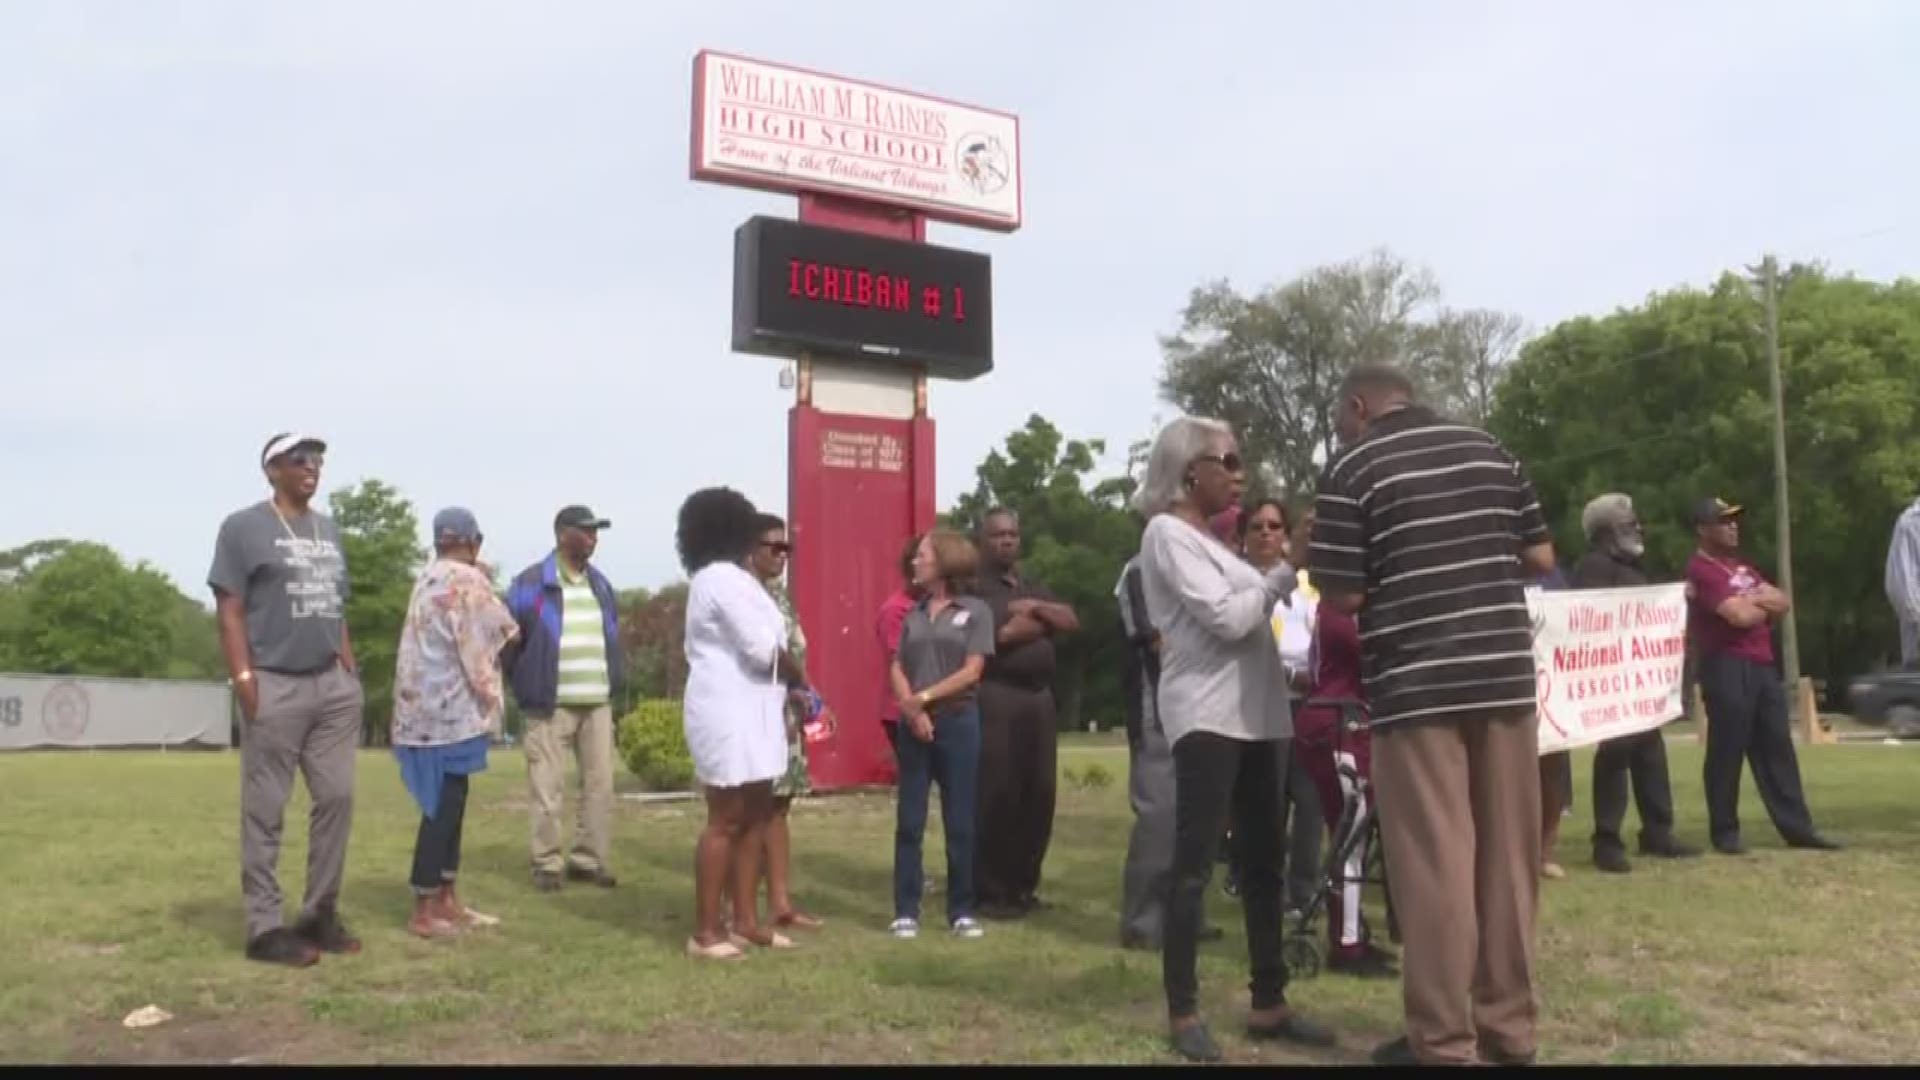 Alumni from decades of Raines gathered outside the school with the message to 'say no to Raines 6-12'.